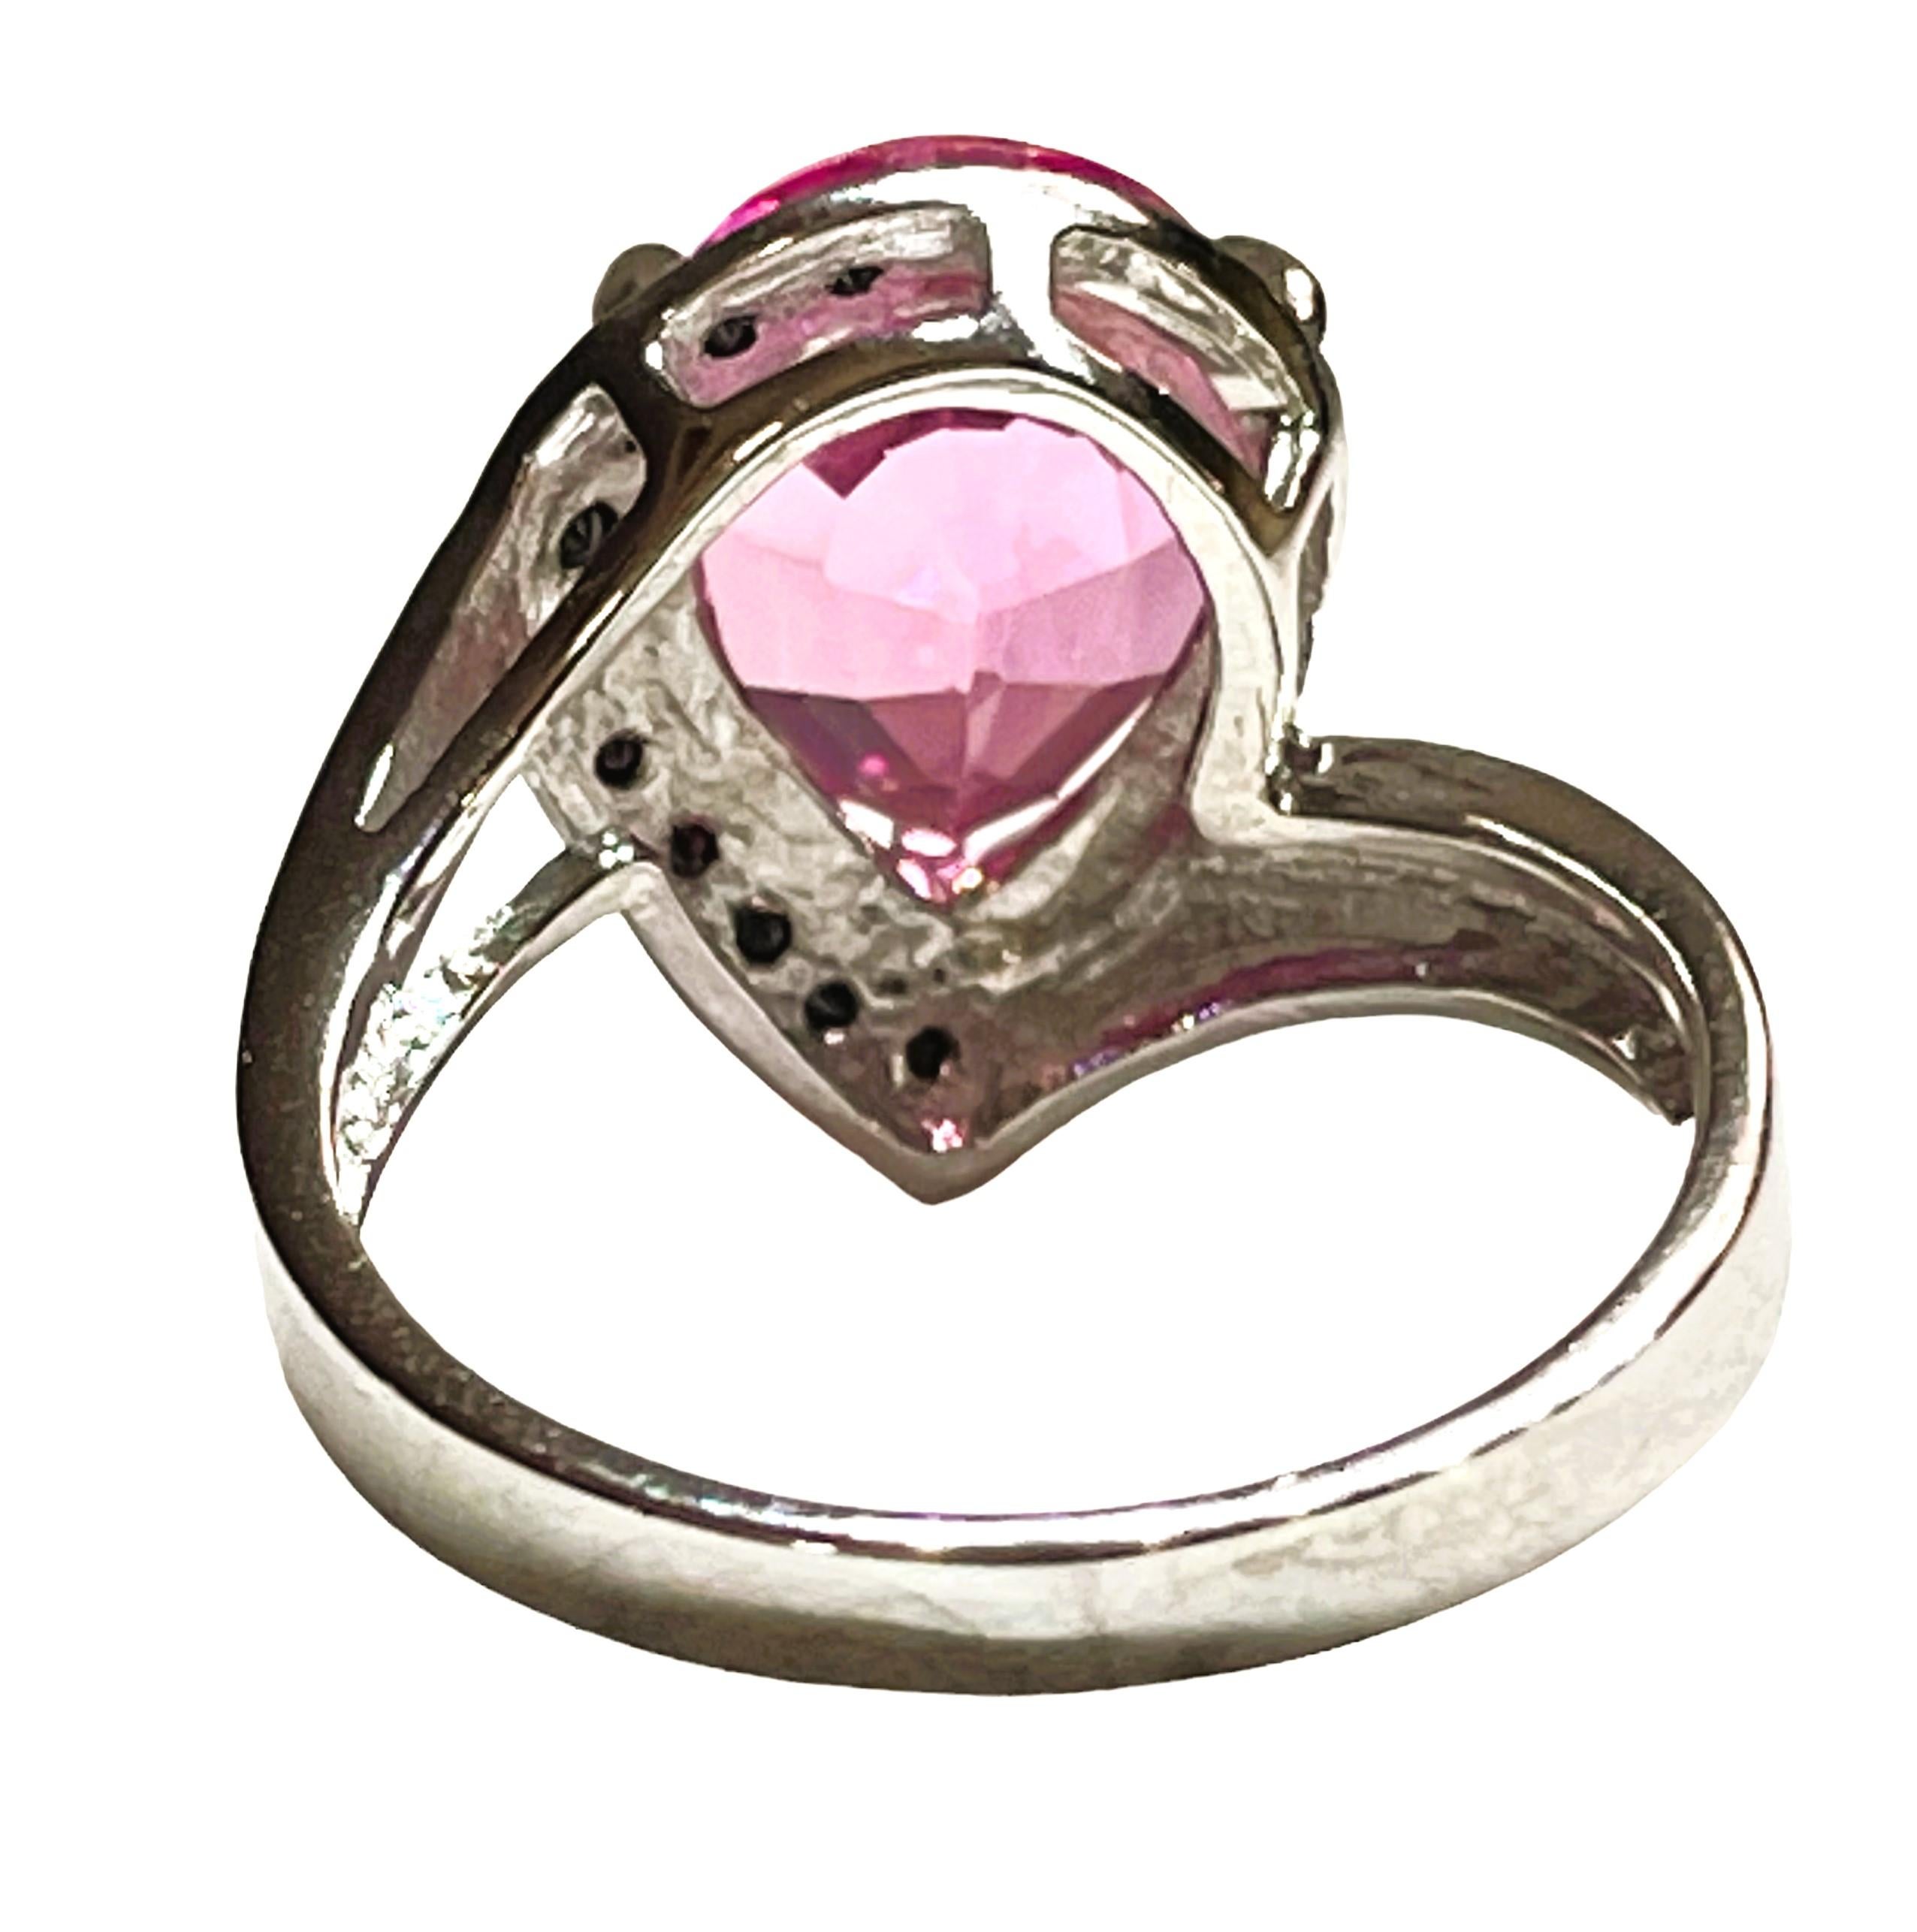 Women's New African If Platinum Pink Tourmaline & Black Spinel Sterling Ring